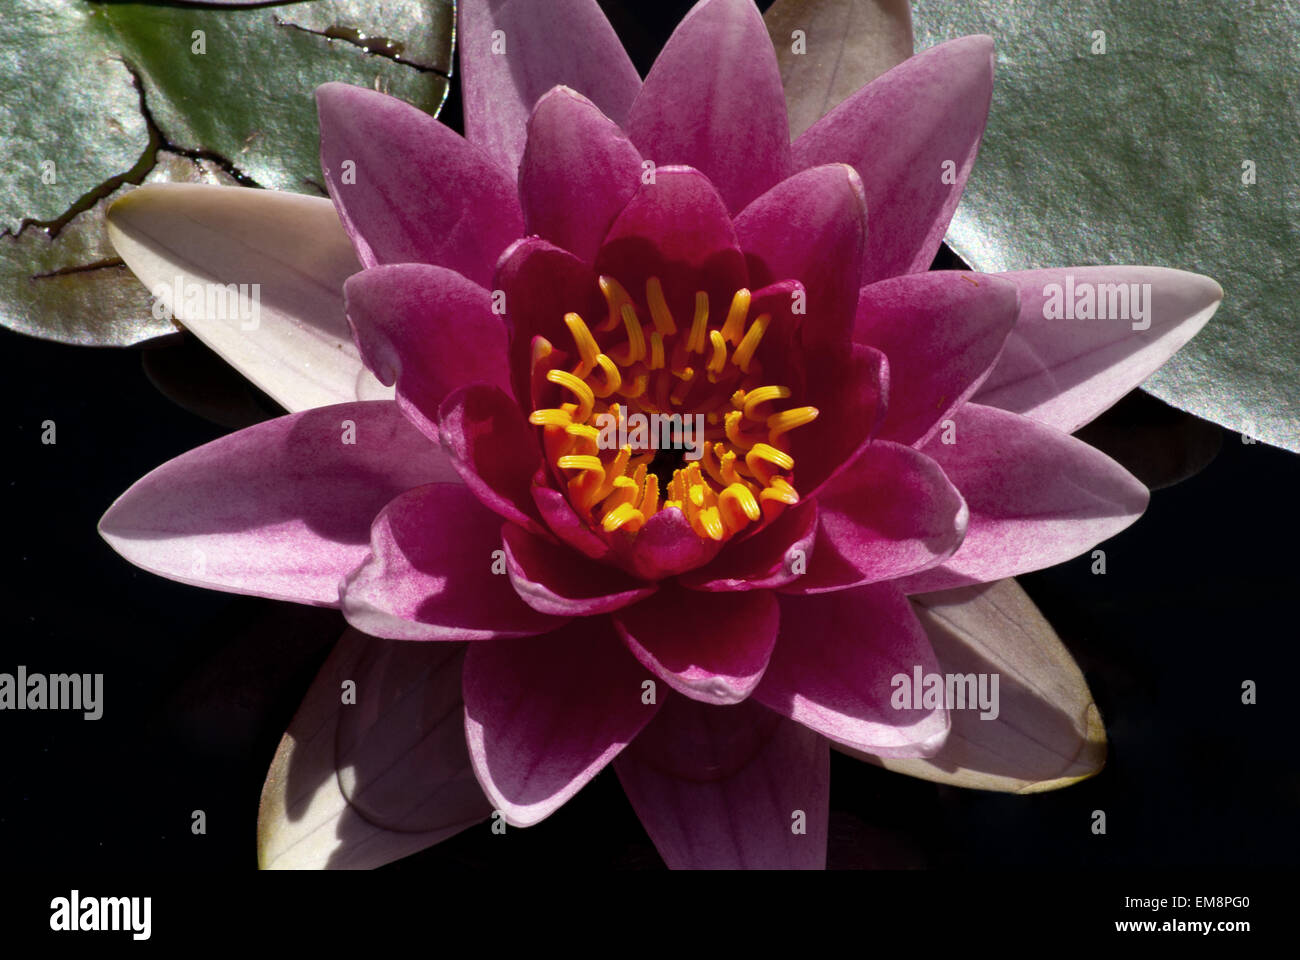 Rosa Water Lilly Blume Nymphaea pubescens Stockfoto